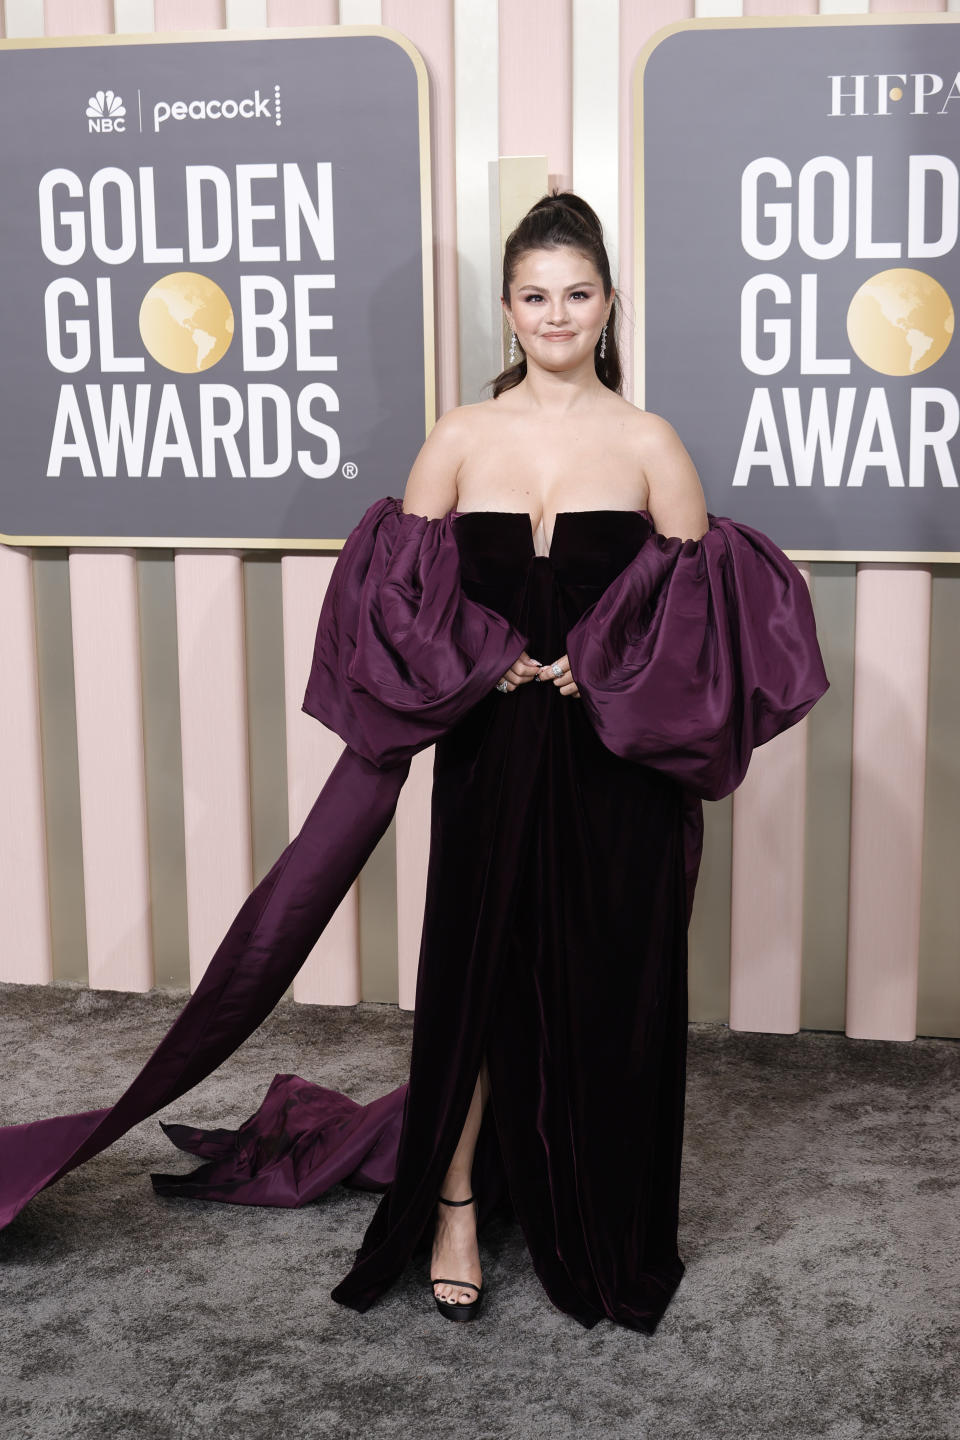 BEVERLY HILLS, CALIFORNIA - JANUARY 10: Selena Gomez attends the 80th Annual Golden Globe Awards at The Beverly Hilton on January 10, 2023 in Beverly Hills, California. (Photo by Frazer Harrison/WireImage)